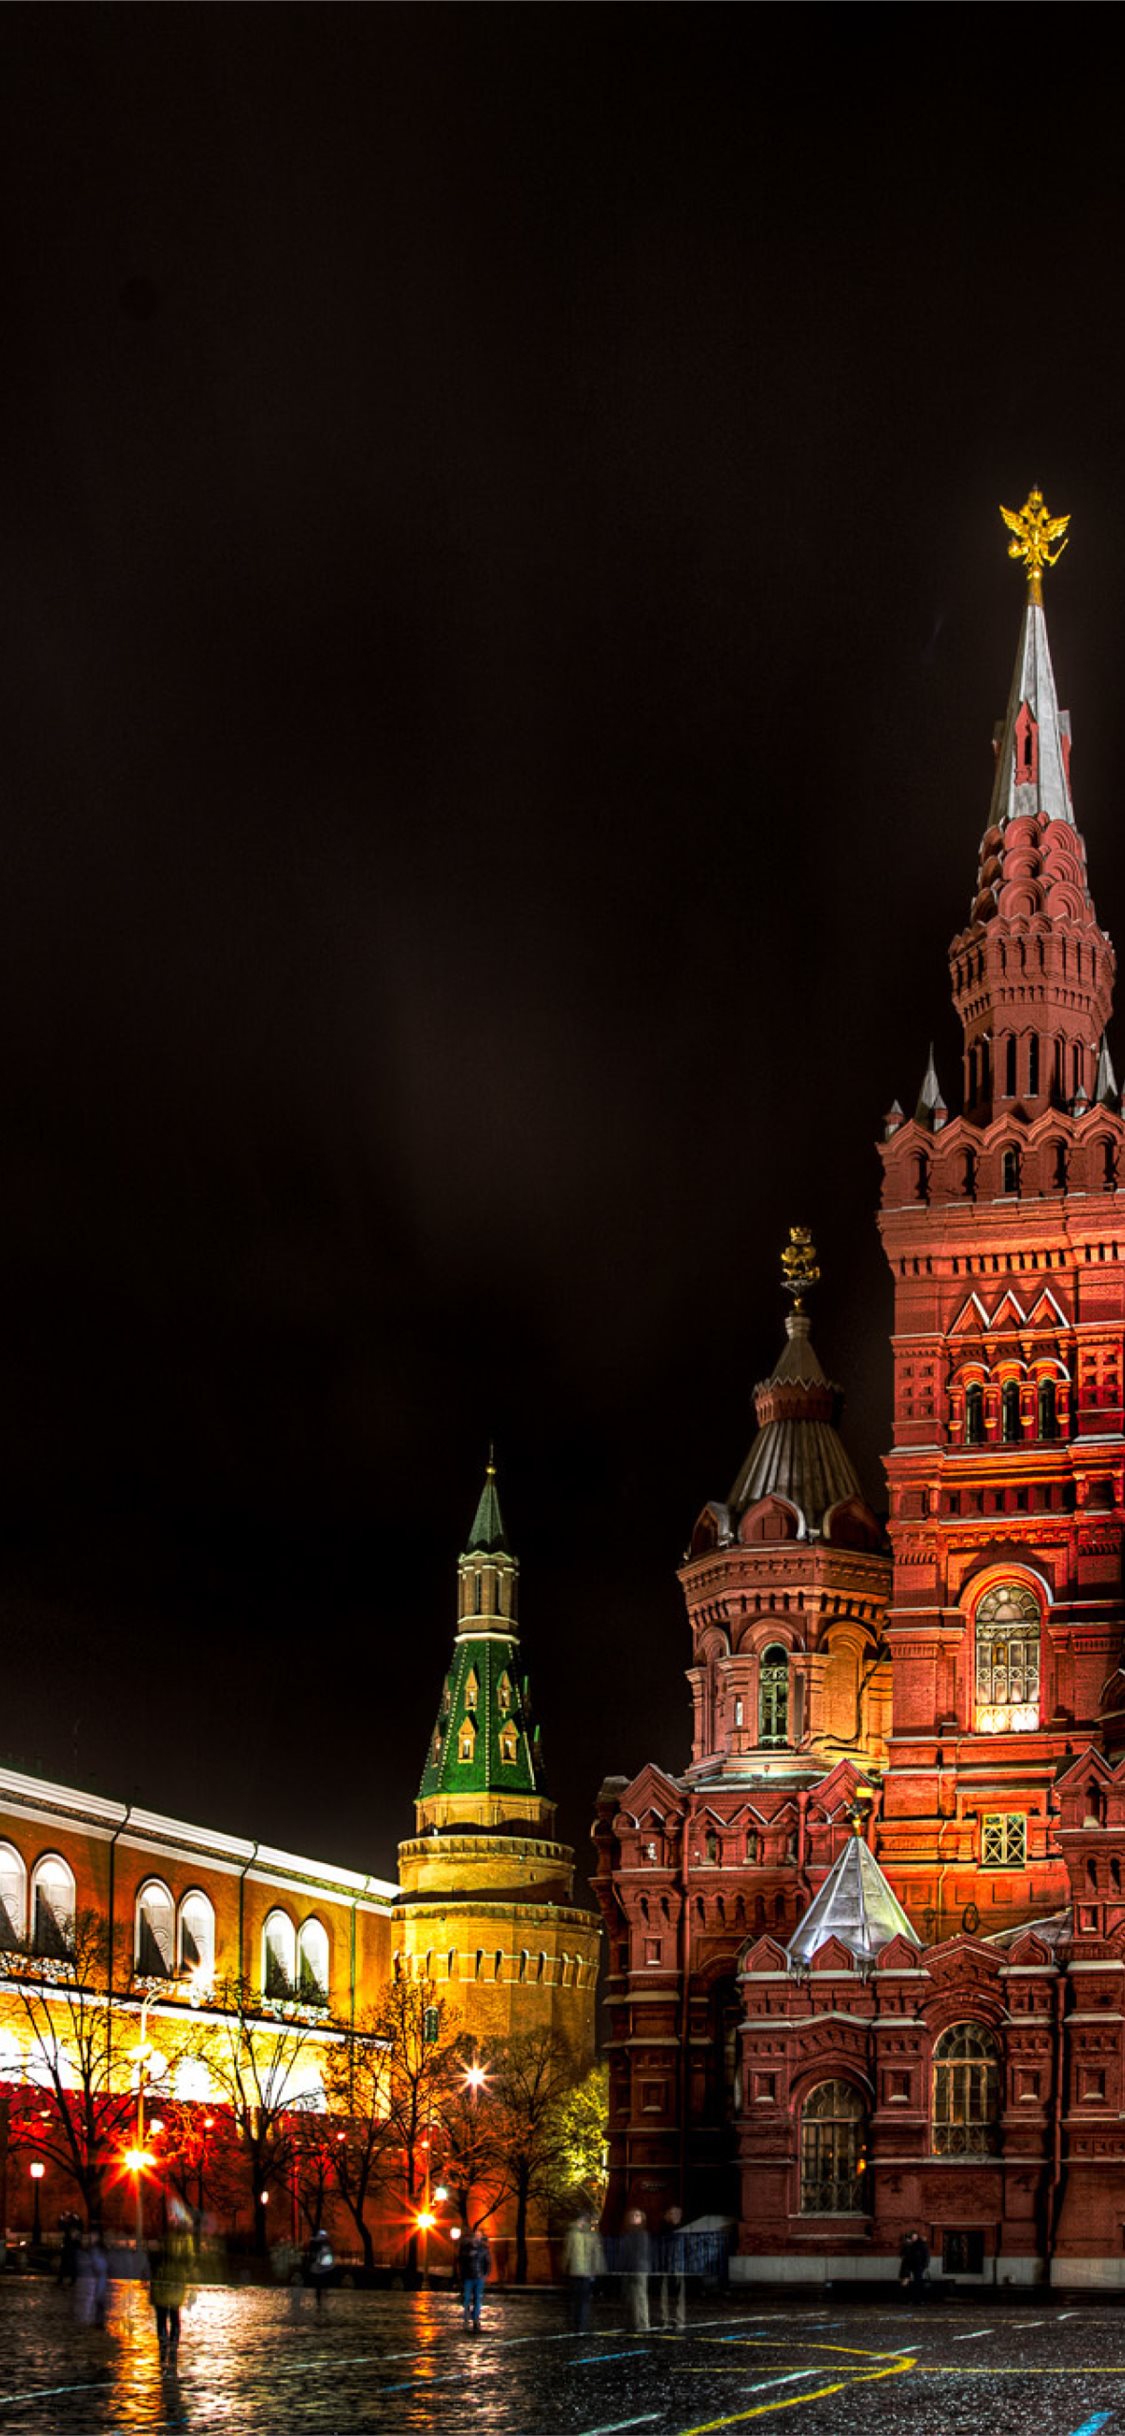 Free download moscow russia red square Resolution HD City 4K Ima iPhone [1125x2436] for your Desktop, Mobile & Tablet. Explore Red Square iPhone Wallpaper. Square Wallpaper, Red iPhone Wallpaper